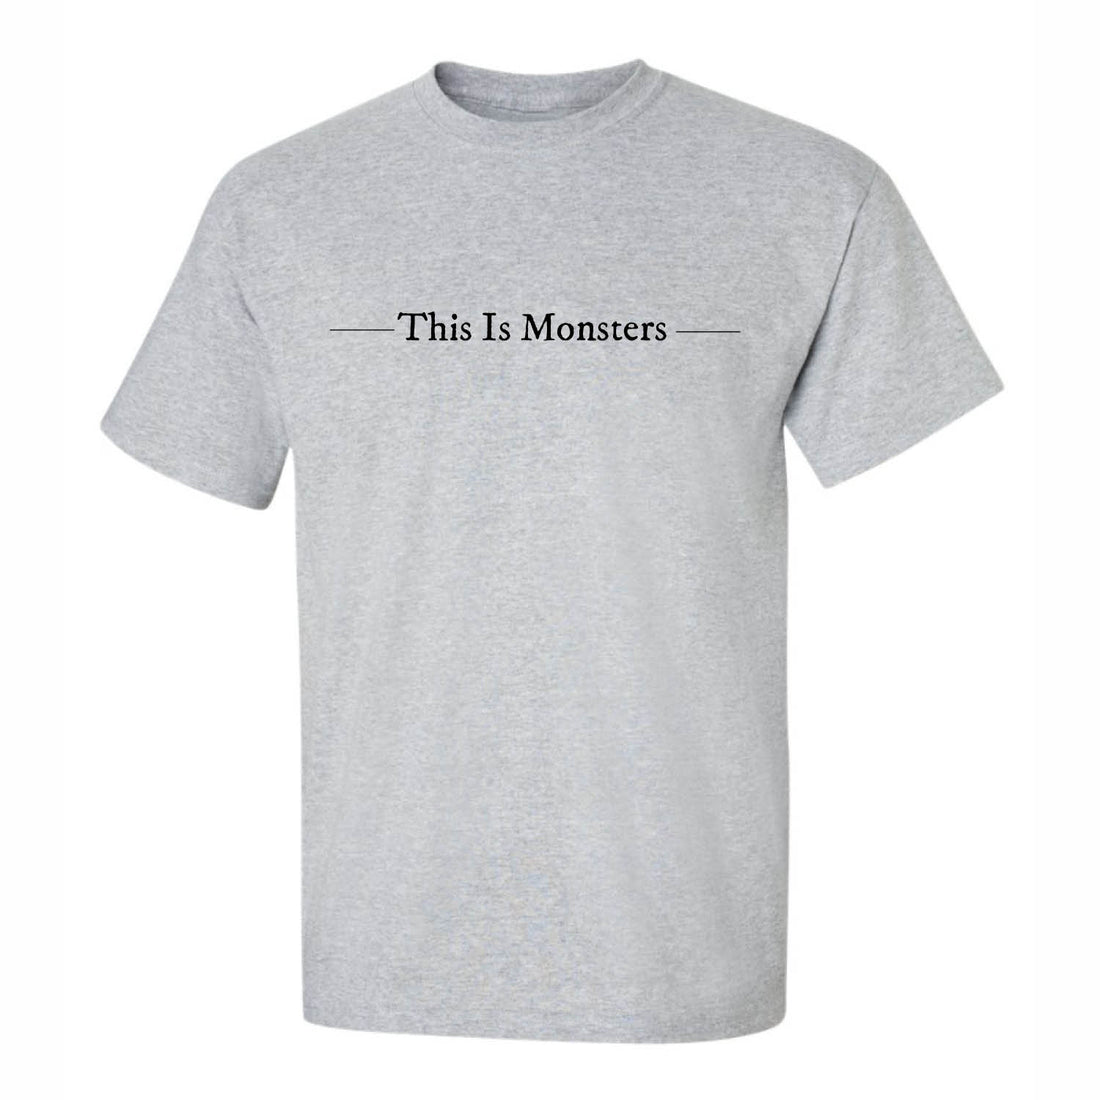 This is Monsters Grey T-Shirt